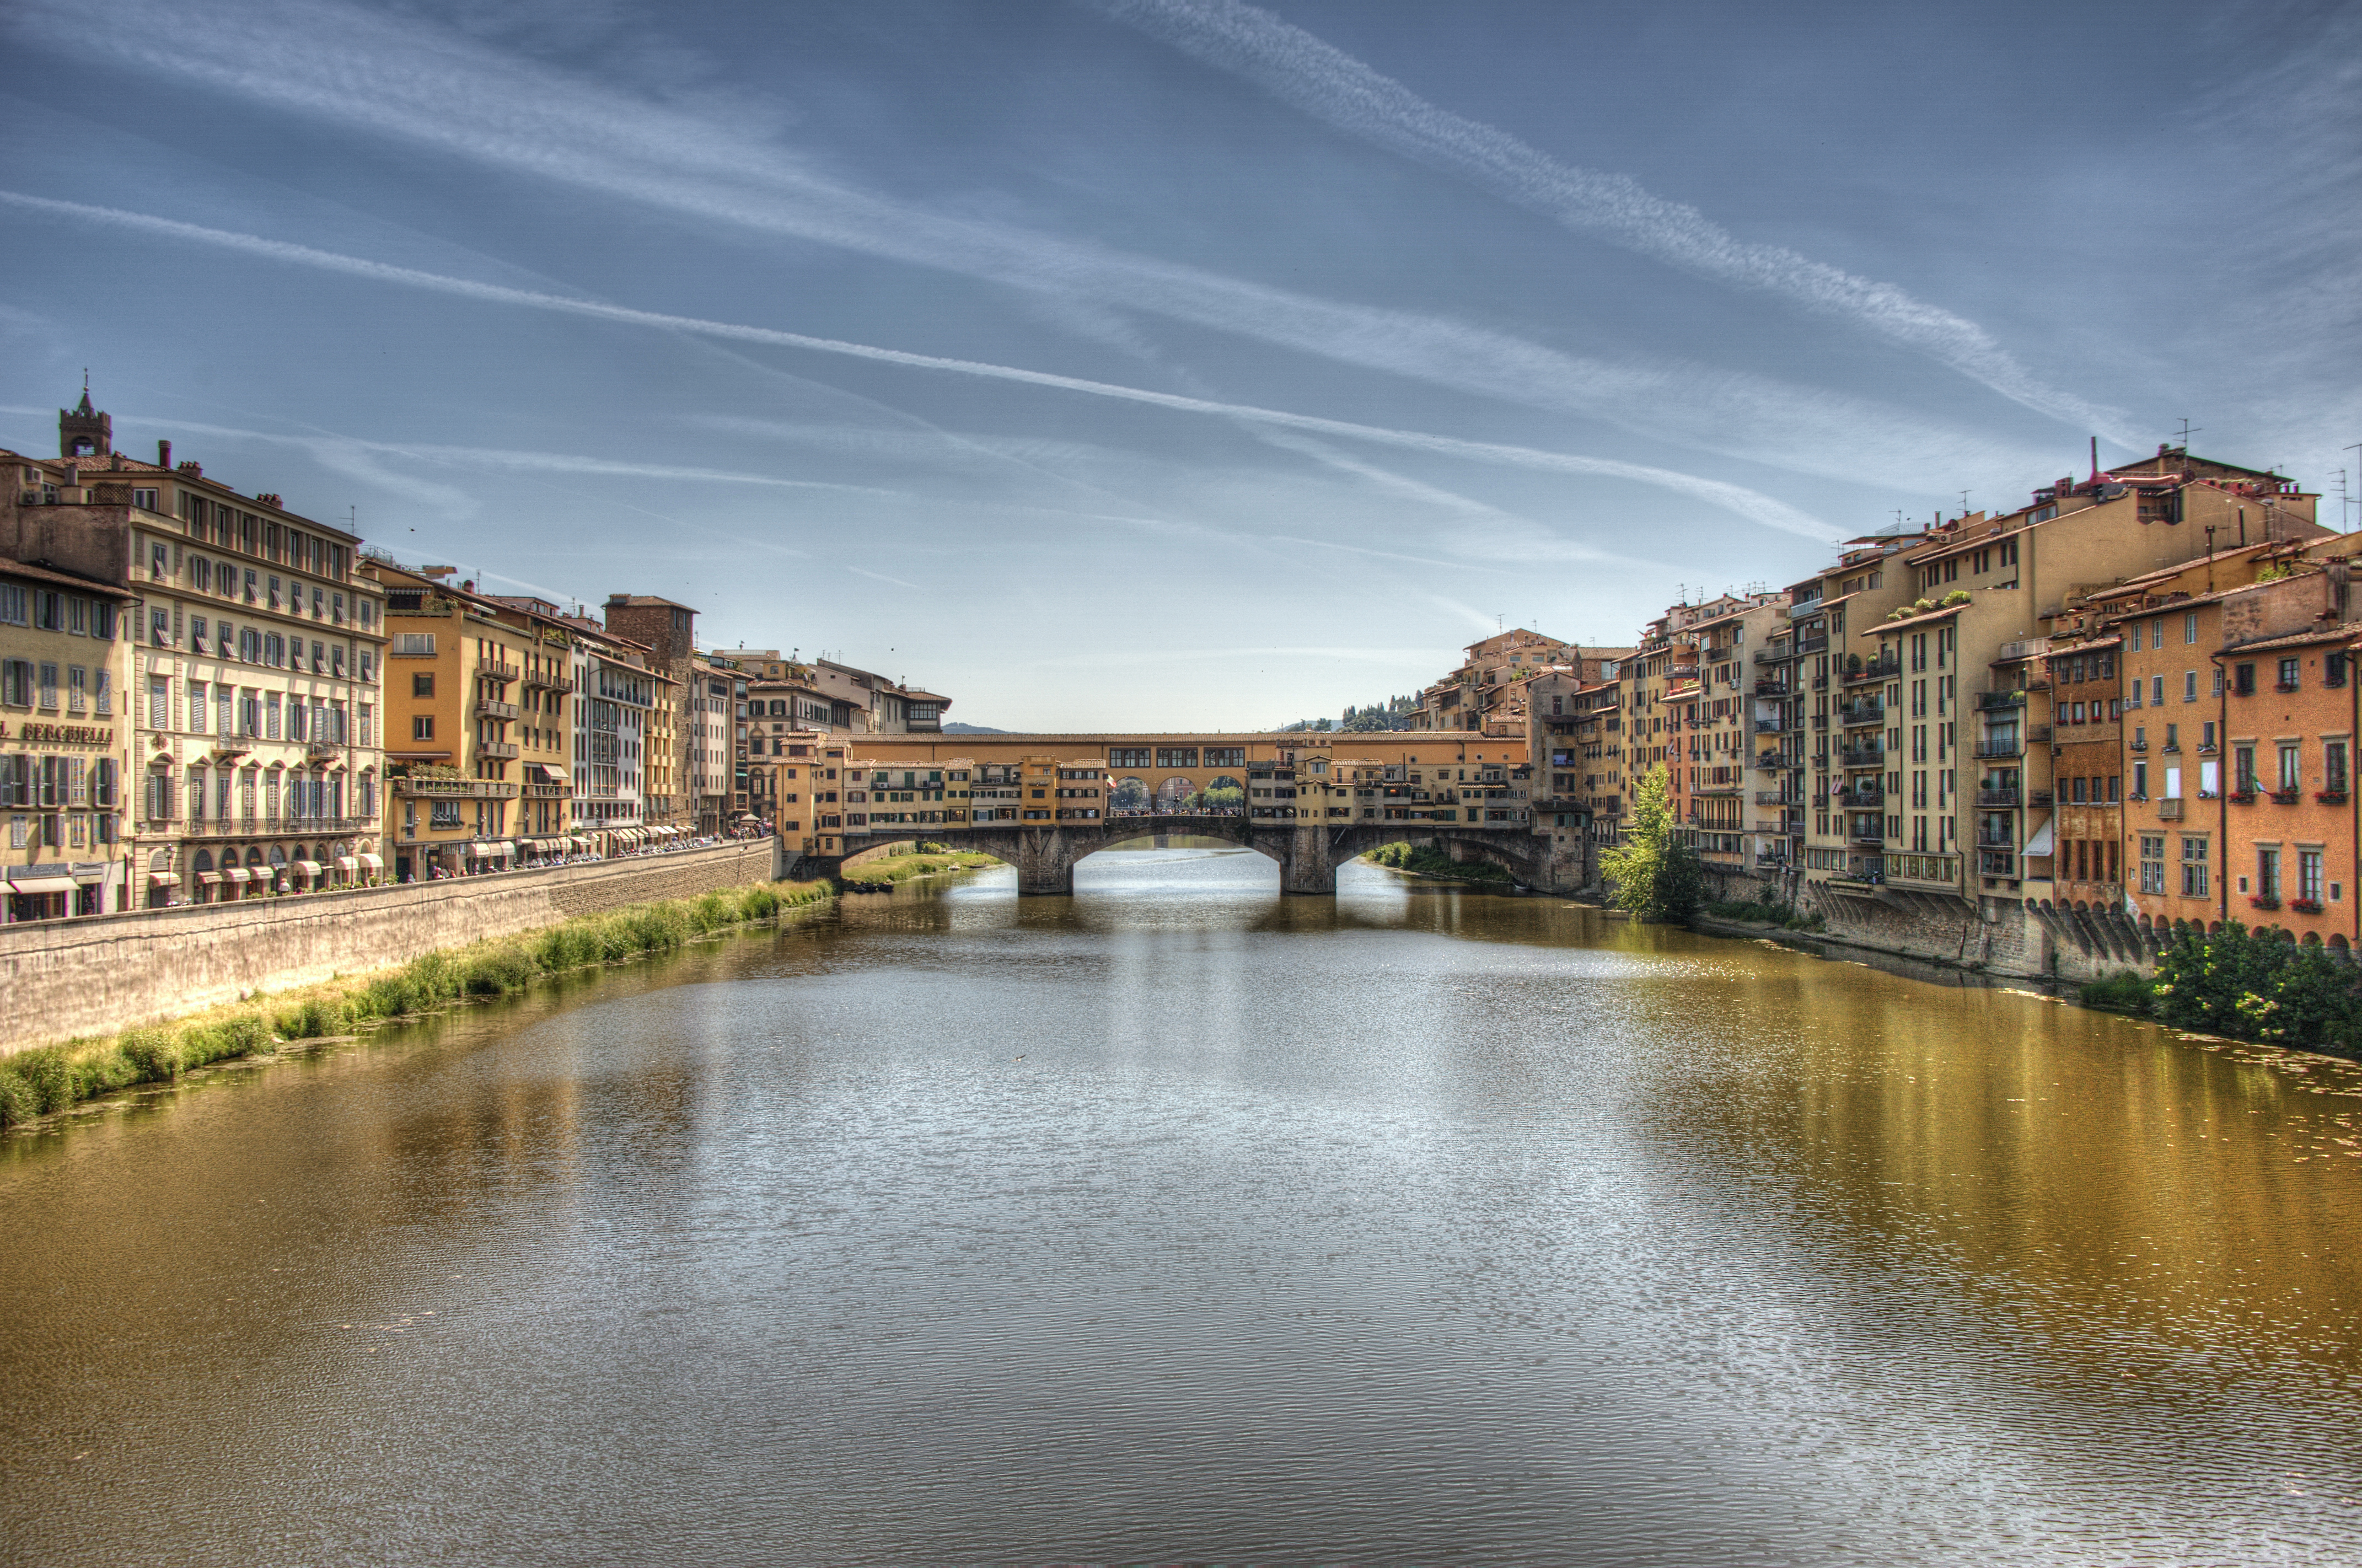 File:Arno River and Ponte Vecchio, Florence.jpg - Wikimedia Commons